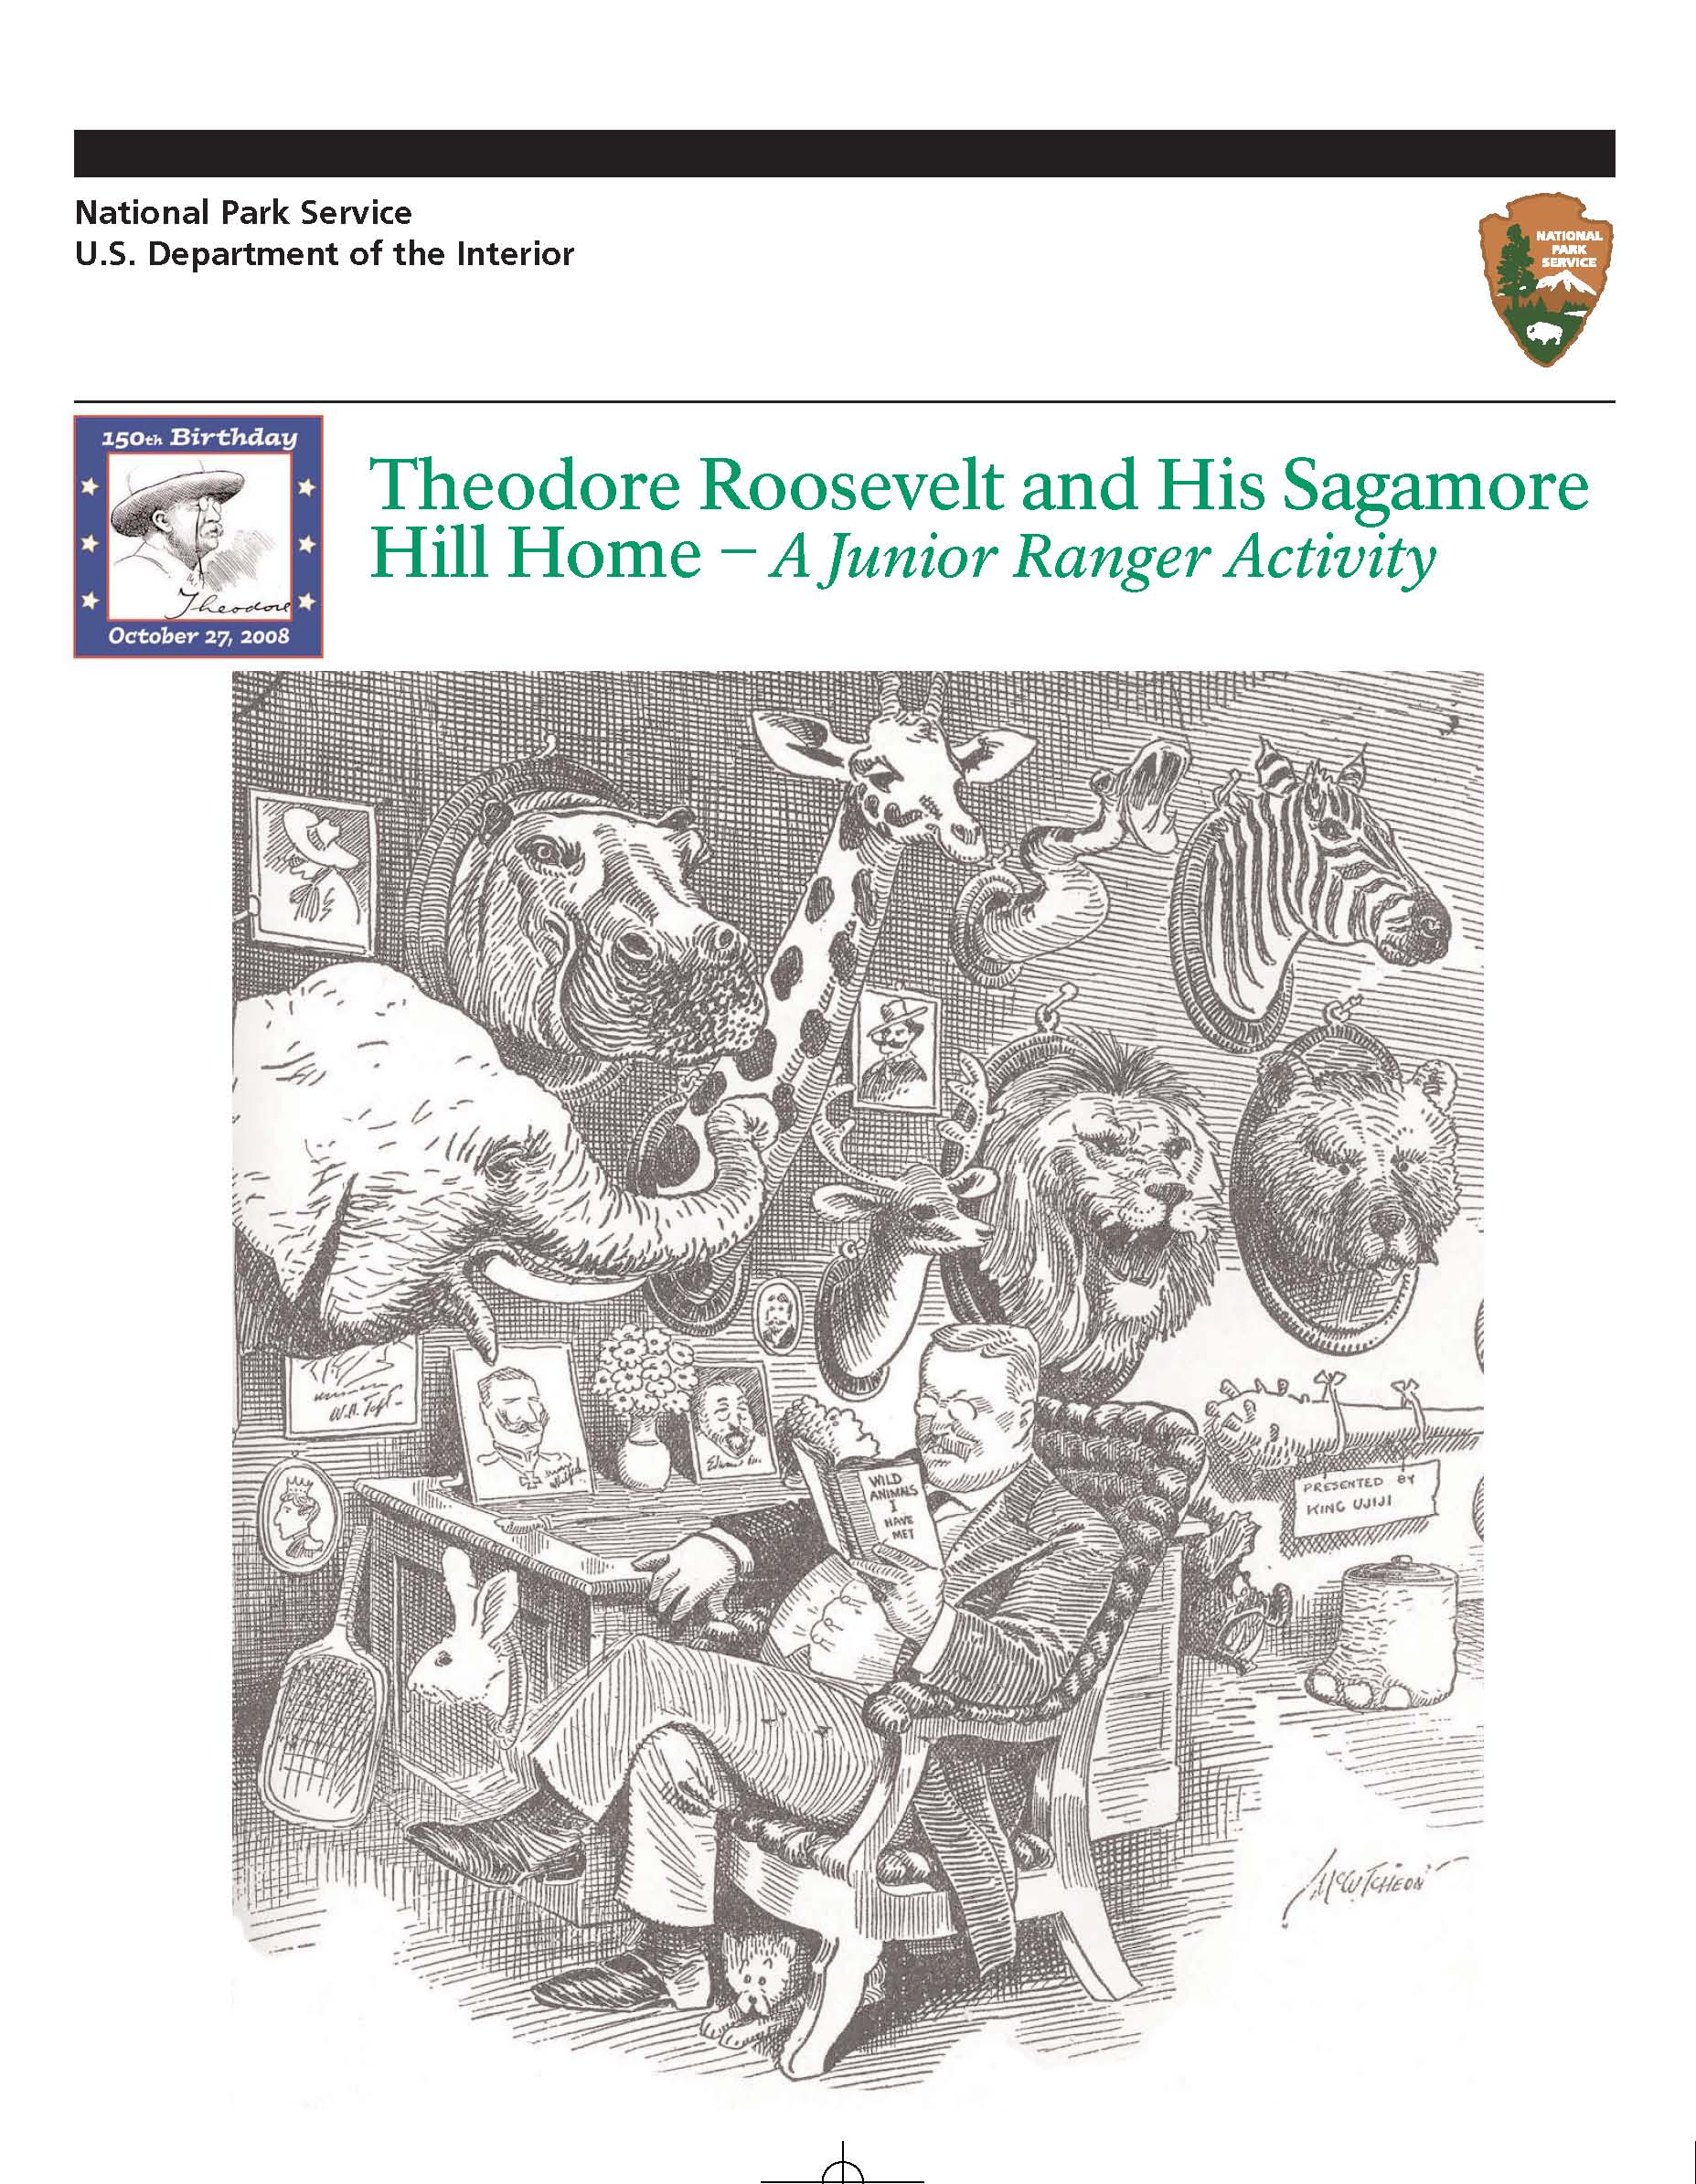 Theodore Roosevelt and his Sagamore Hill Home, one of four Junior Ranger activities.